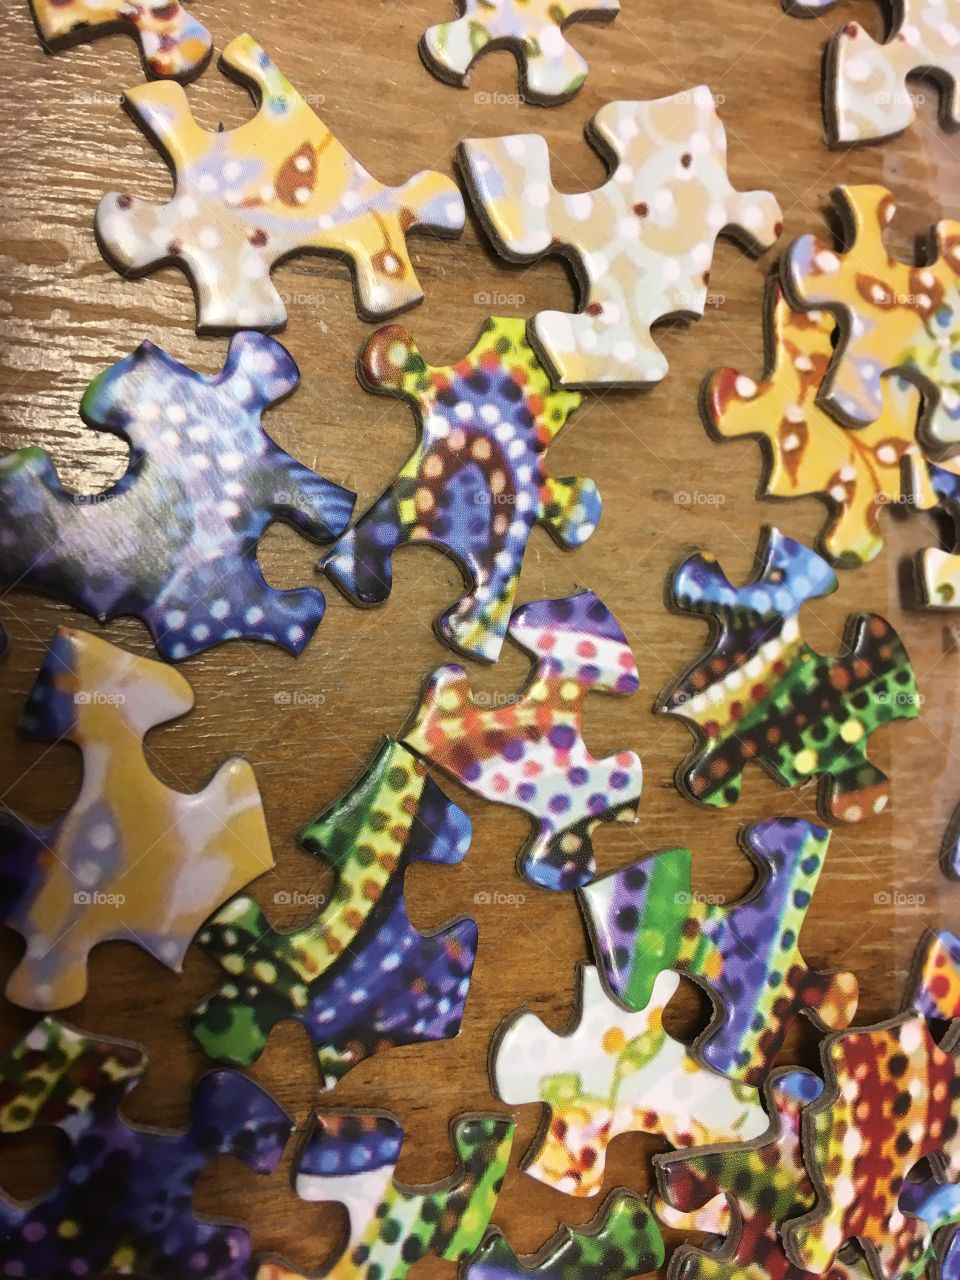 Oh my look at all the dots on these puzzle pieces! It’s gonna be a hard one to put together.